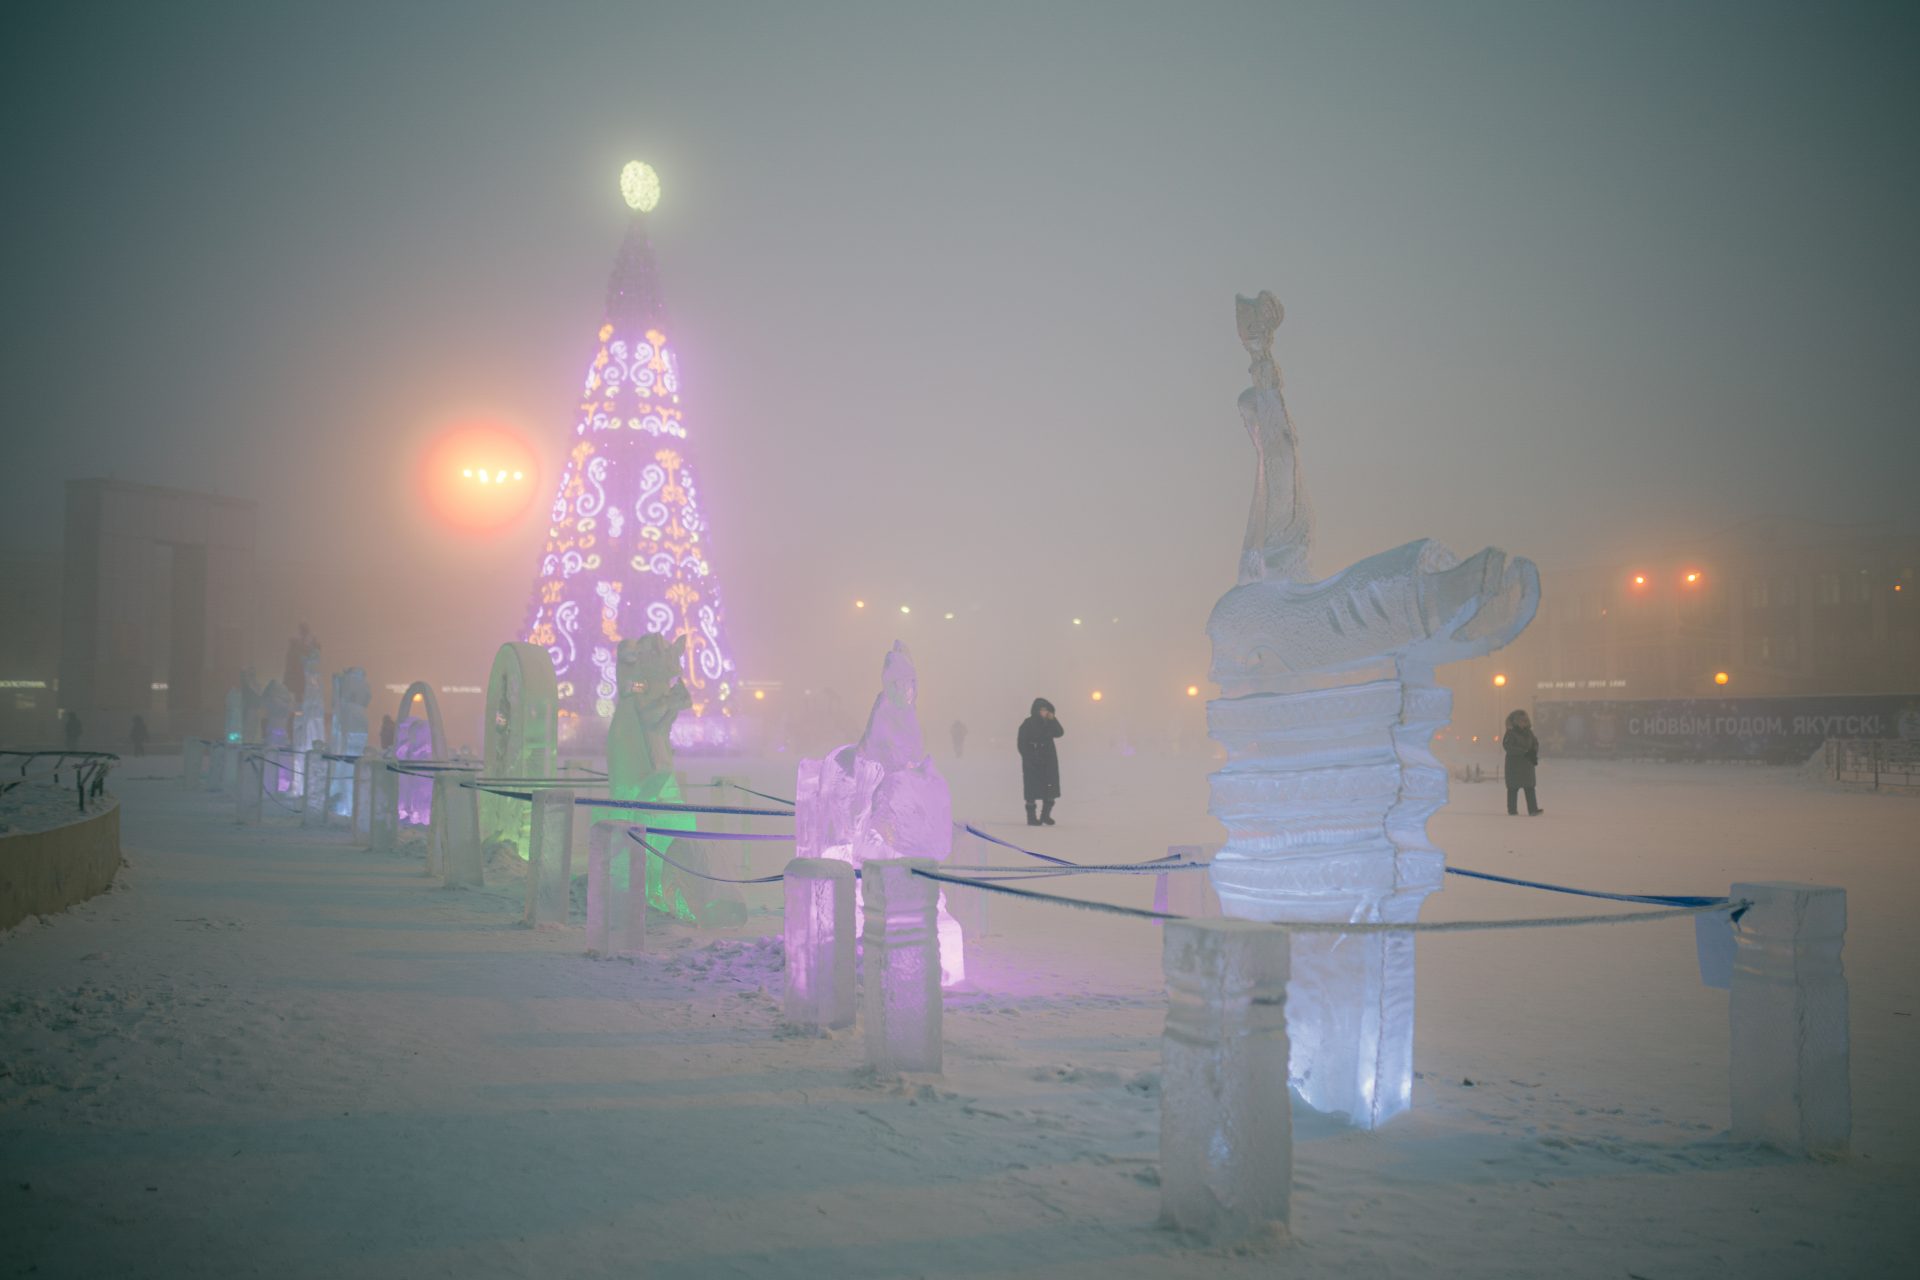 This is the coldest city on Earth: Yakutsk, Siberia